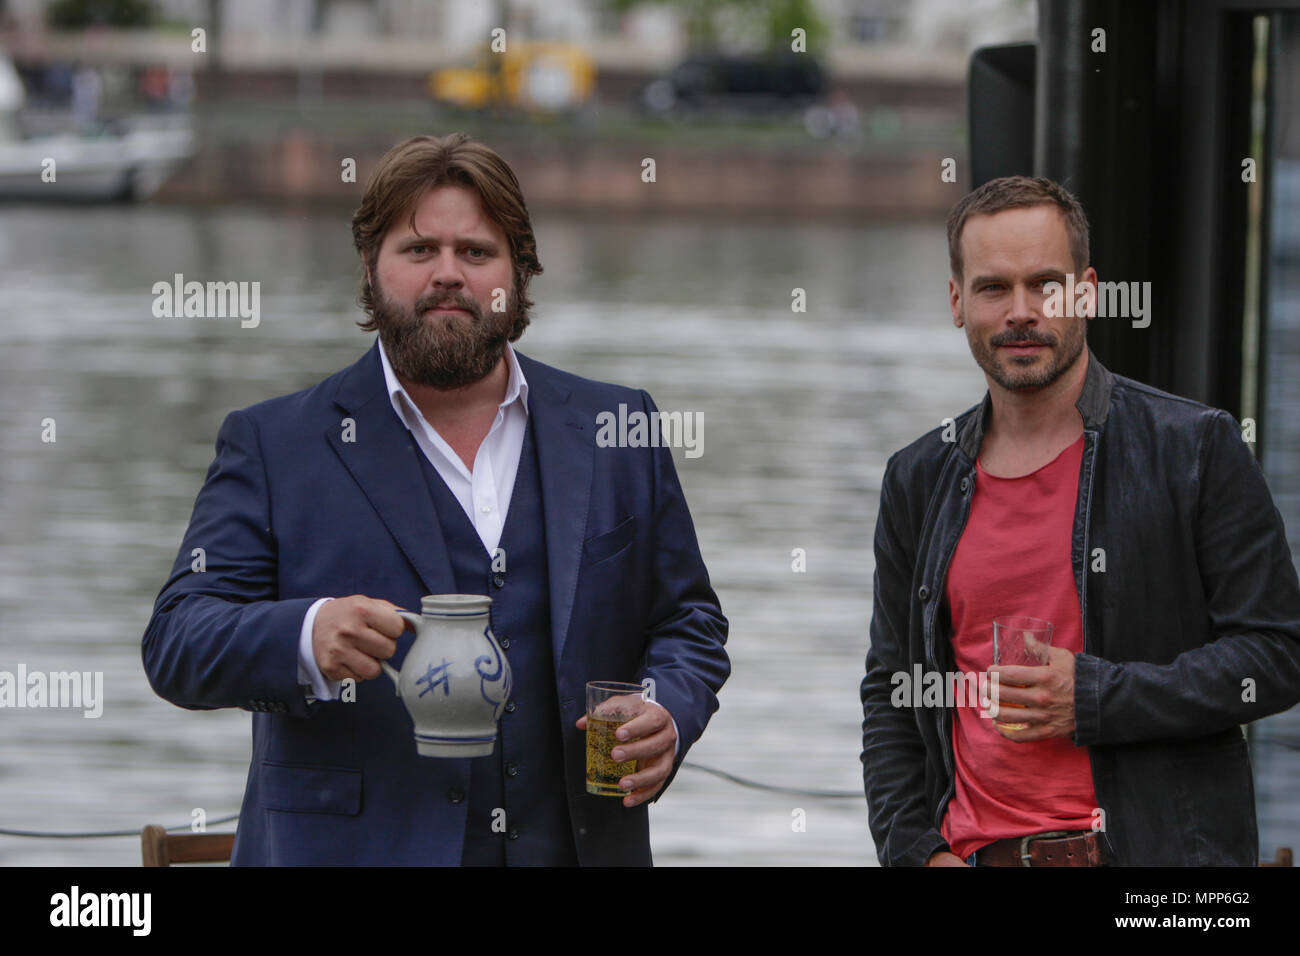 Frankfurt, Germany. 24th May 2018. Actors Antoine Monot, Jr. (left) and Wanja Mues (right) pose on the terrace of the houseboat that is owned by Mues' character Leo in the TV show with two glasses of cider and a Bembel (a local type of stoneware jug, used for cider). 4 new episodes of the relaunch of the long running TV series 'Ein Fall fuer zwei’ (A case for two) are being filmed in Frankfurt for the German state TV broadcaster ZDF (Zweites Deutsches Fernsehen). It stars Antoine Monot, Jr. as defence attorney Benjamin ‘Benni’ Hornberg and Wanja Mues as private investigator Leo Oswald. The epi Stock Photo